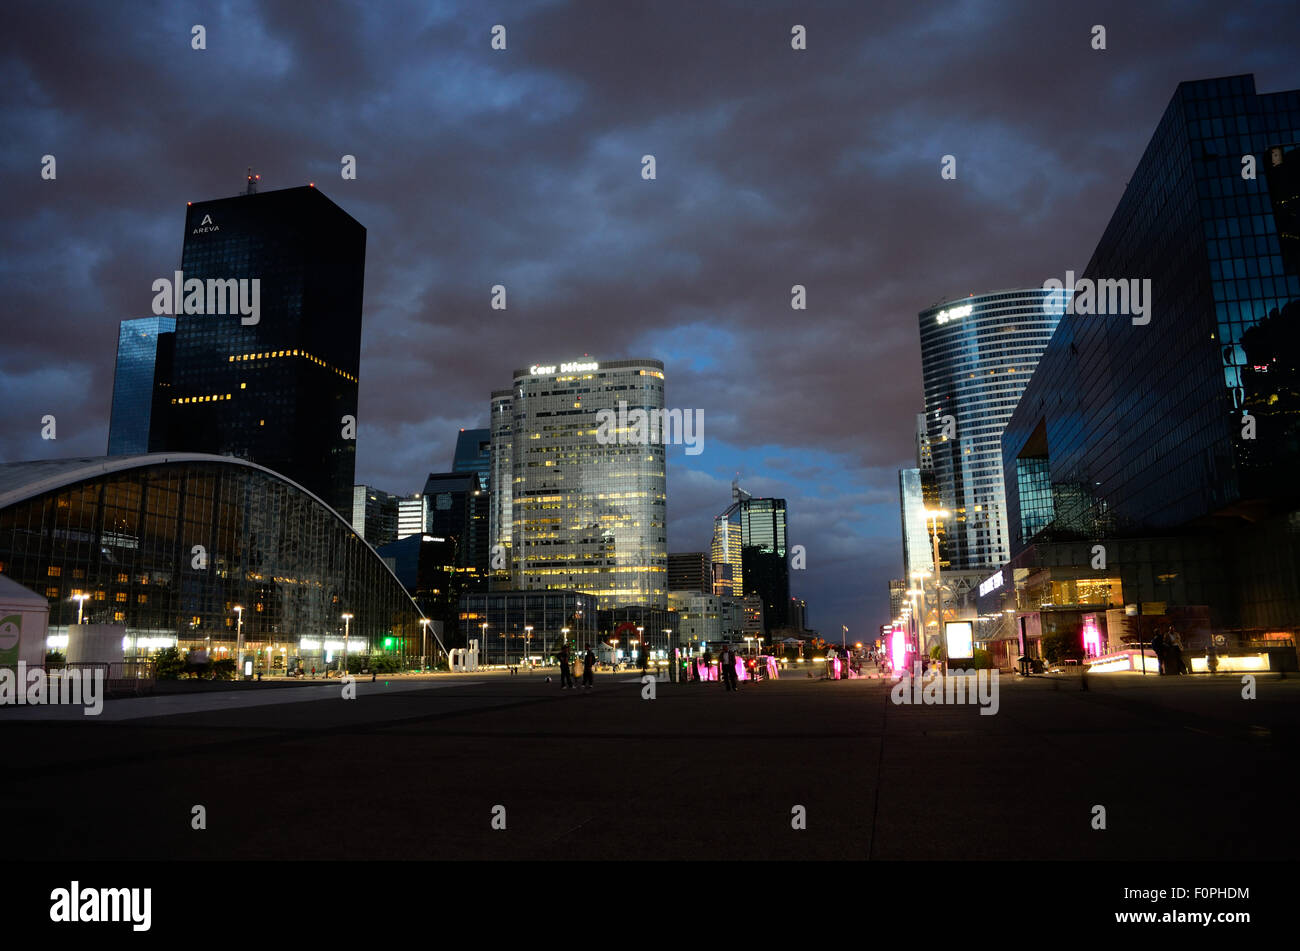 The La Defense business district in Paris pictured at night. Stock Photo